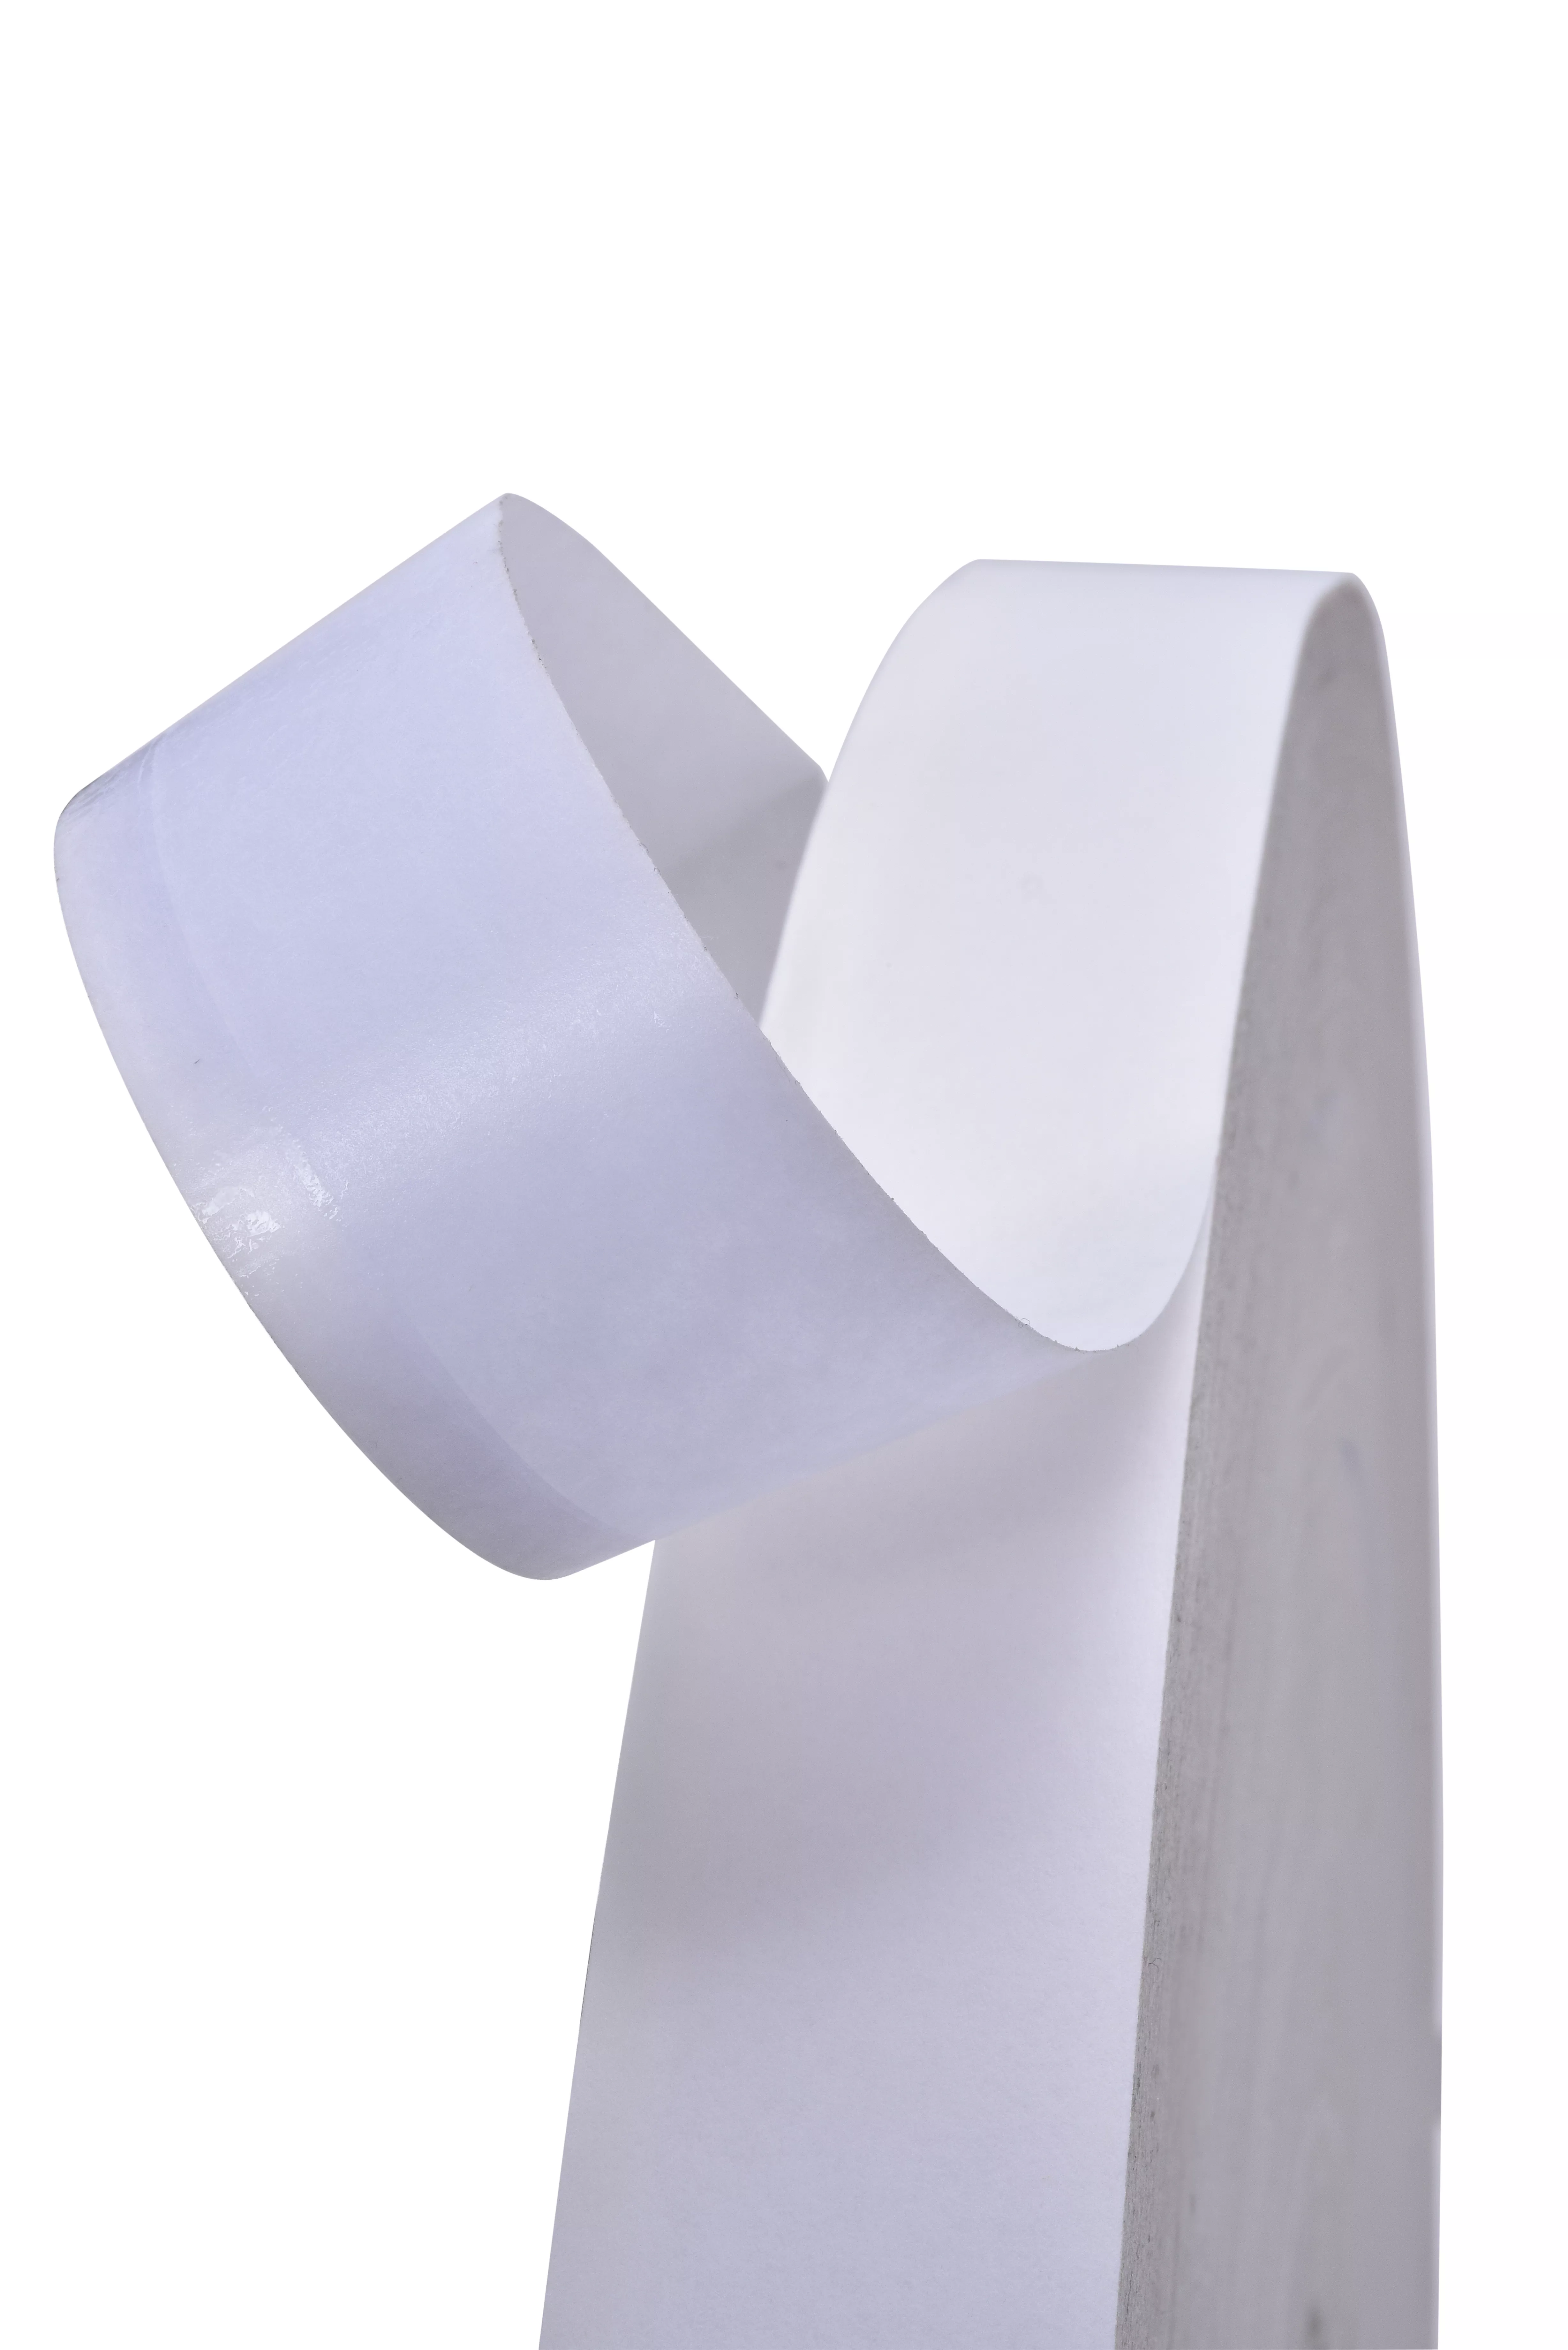 3M™ Venture Tape™ Double Coated Tissue Self Seal Lap Left FLE Tape
3686FLE, White, 1 1/4 in x 600 yd, 5 Roll/Case, Restricted